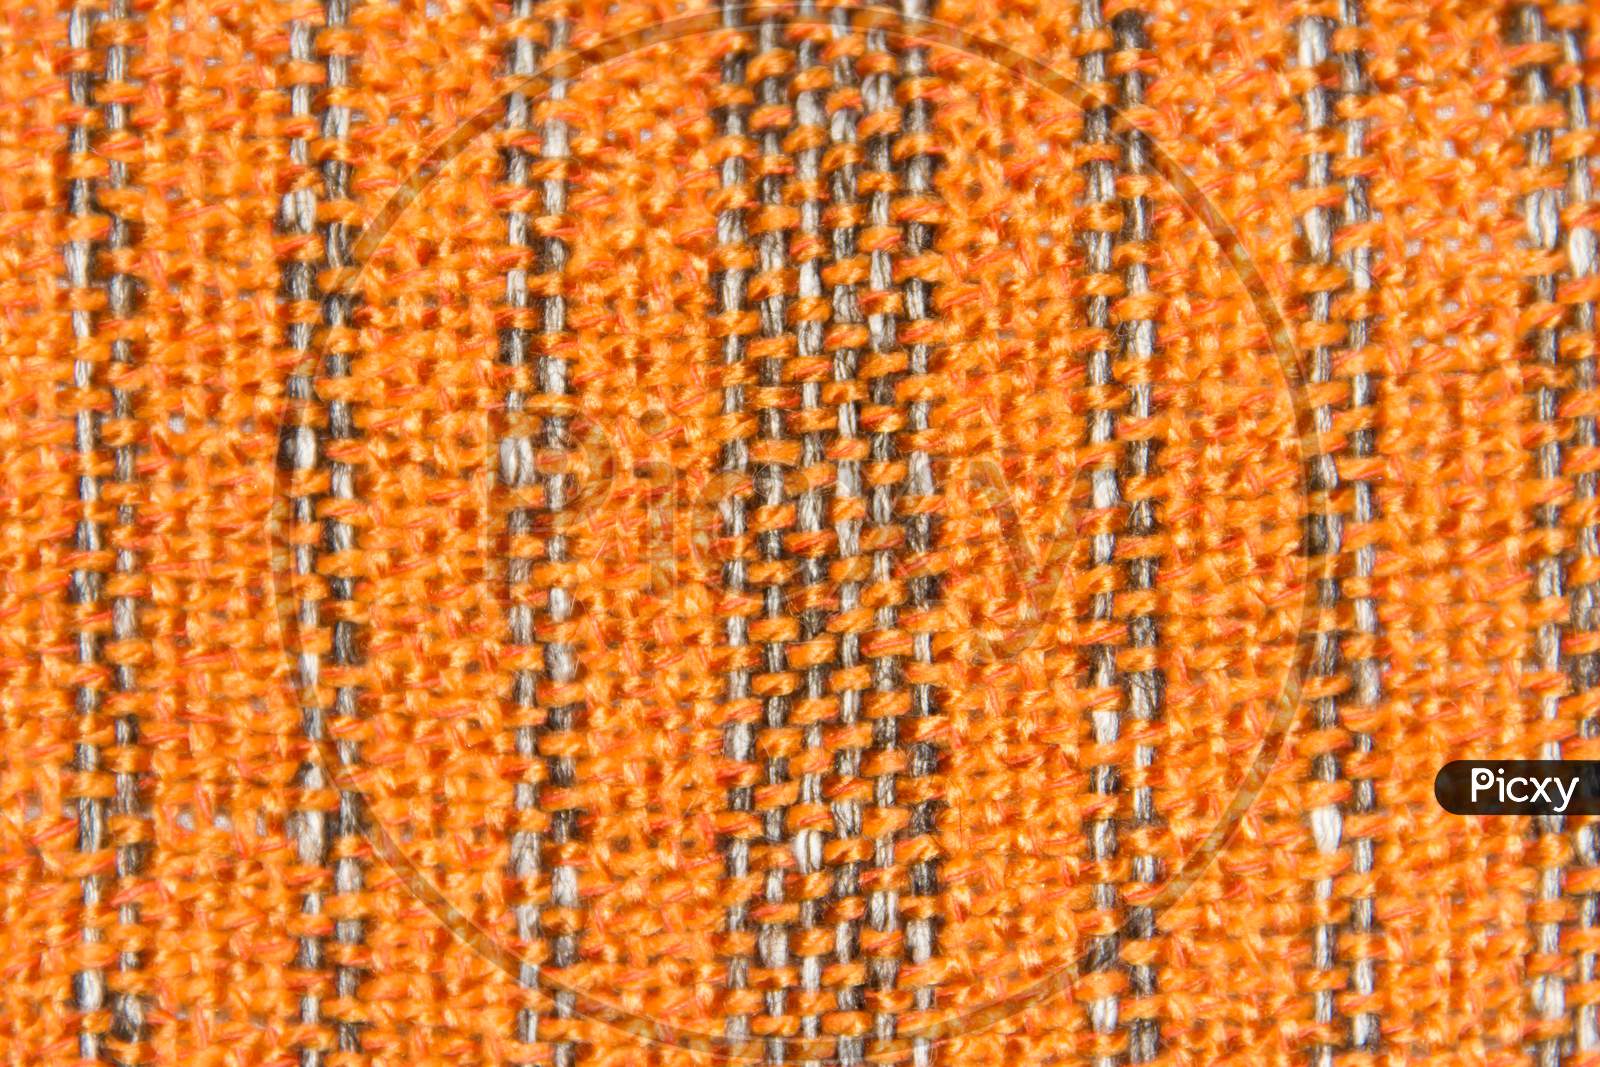 Woven Texture Background On Loom